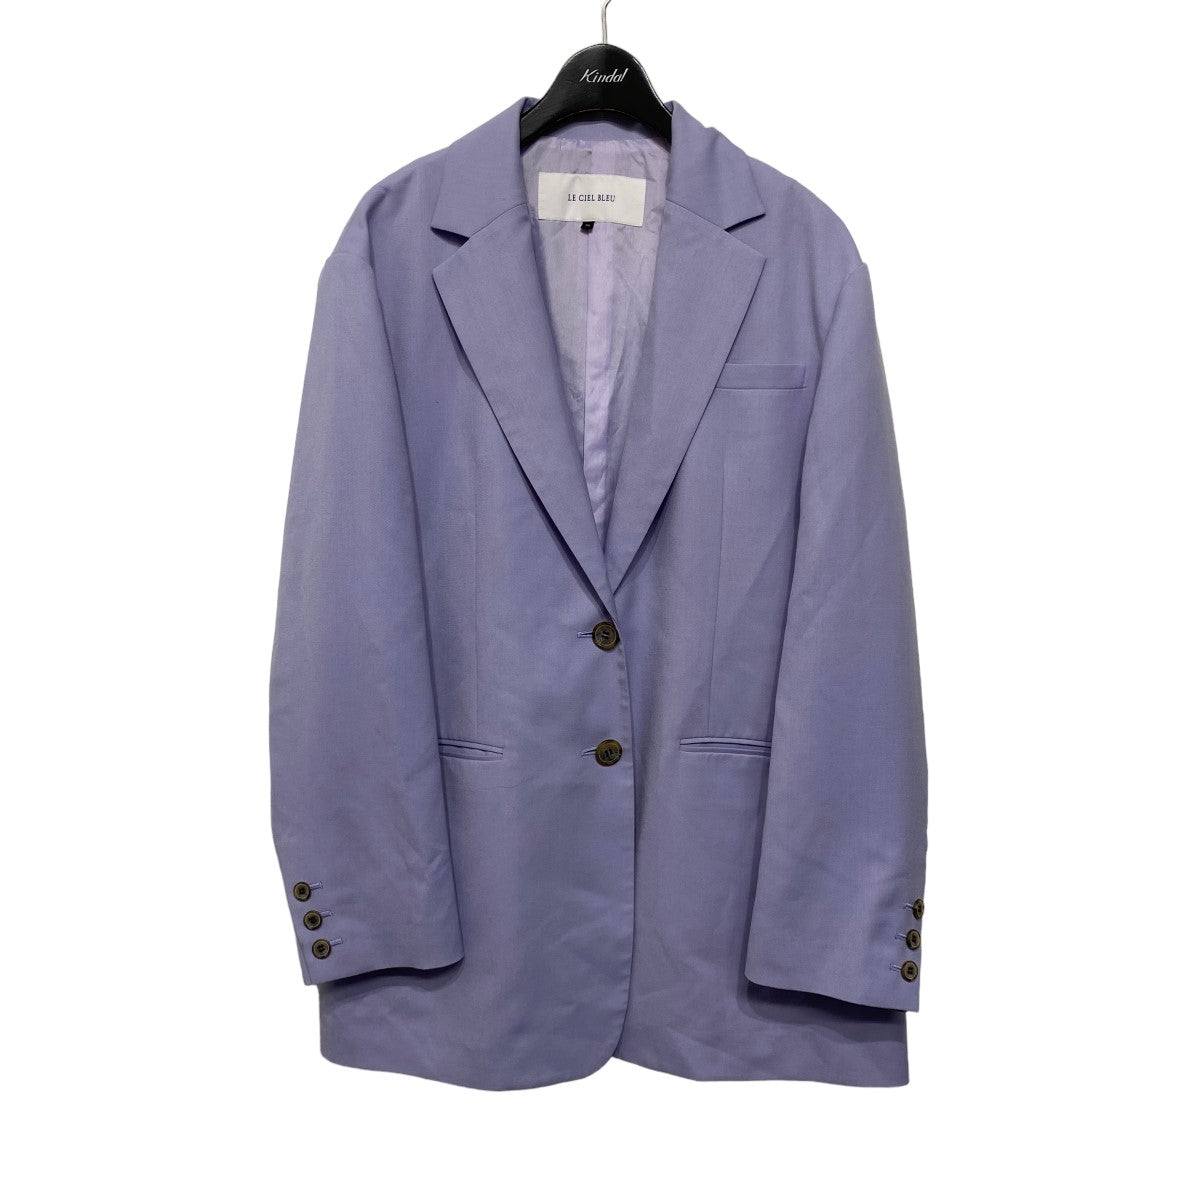 LE CIEL BLEU(ルシェルブルー) Oversized Tailored Jacket 22S64302 